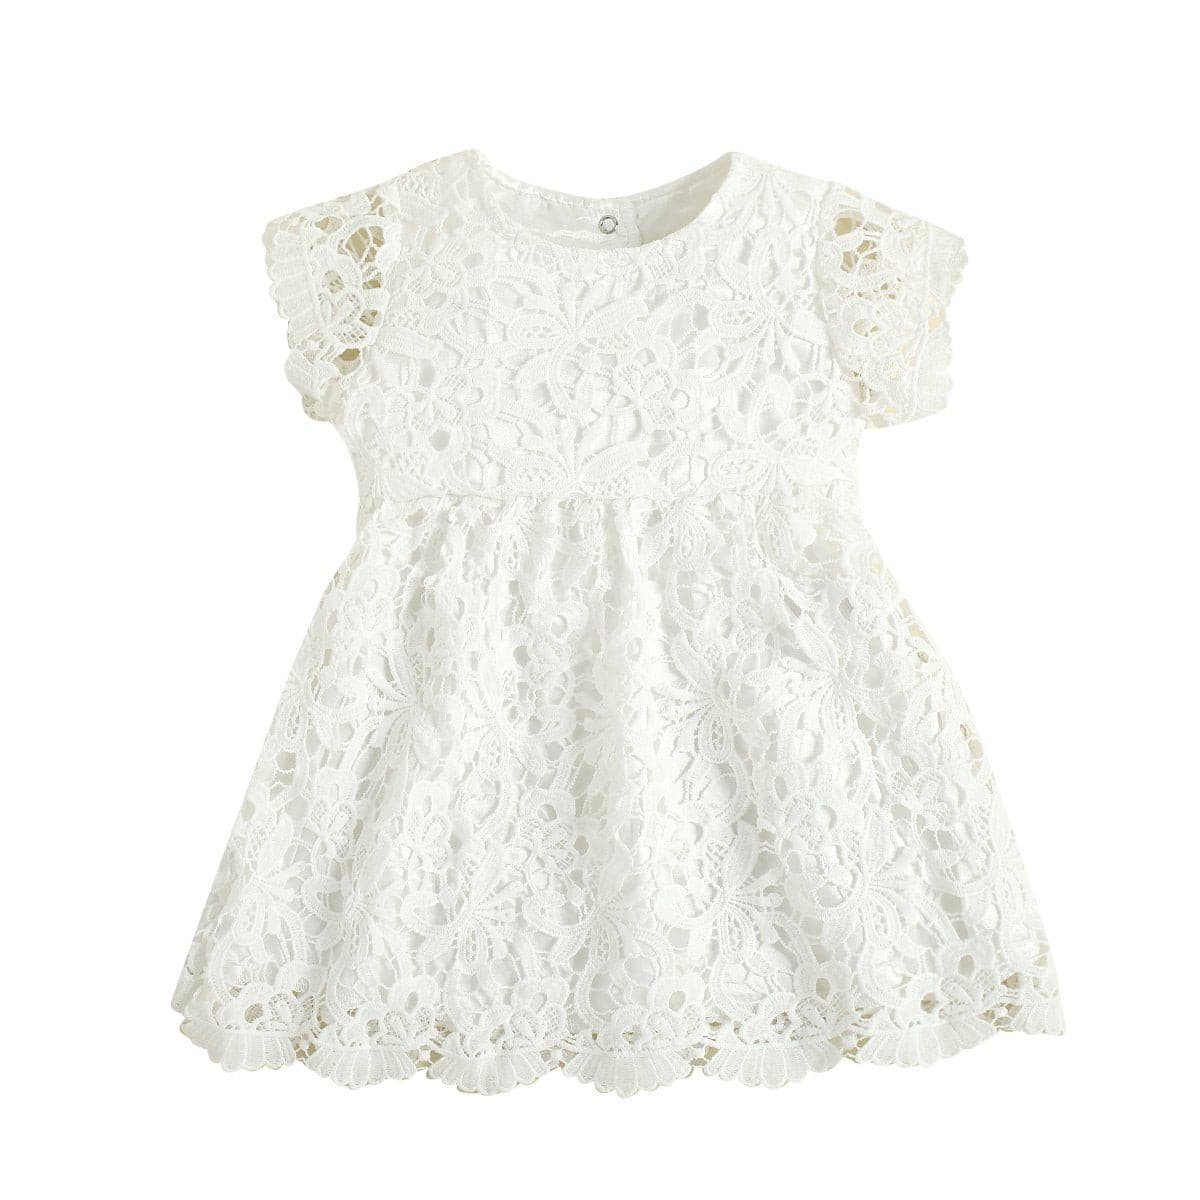 Baby Girl Lace Dress.